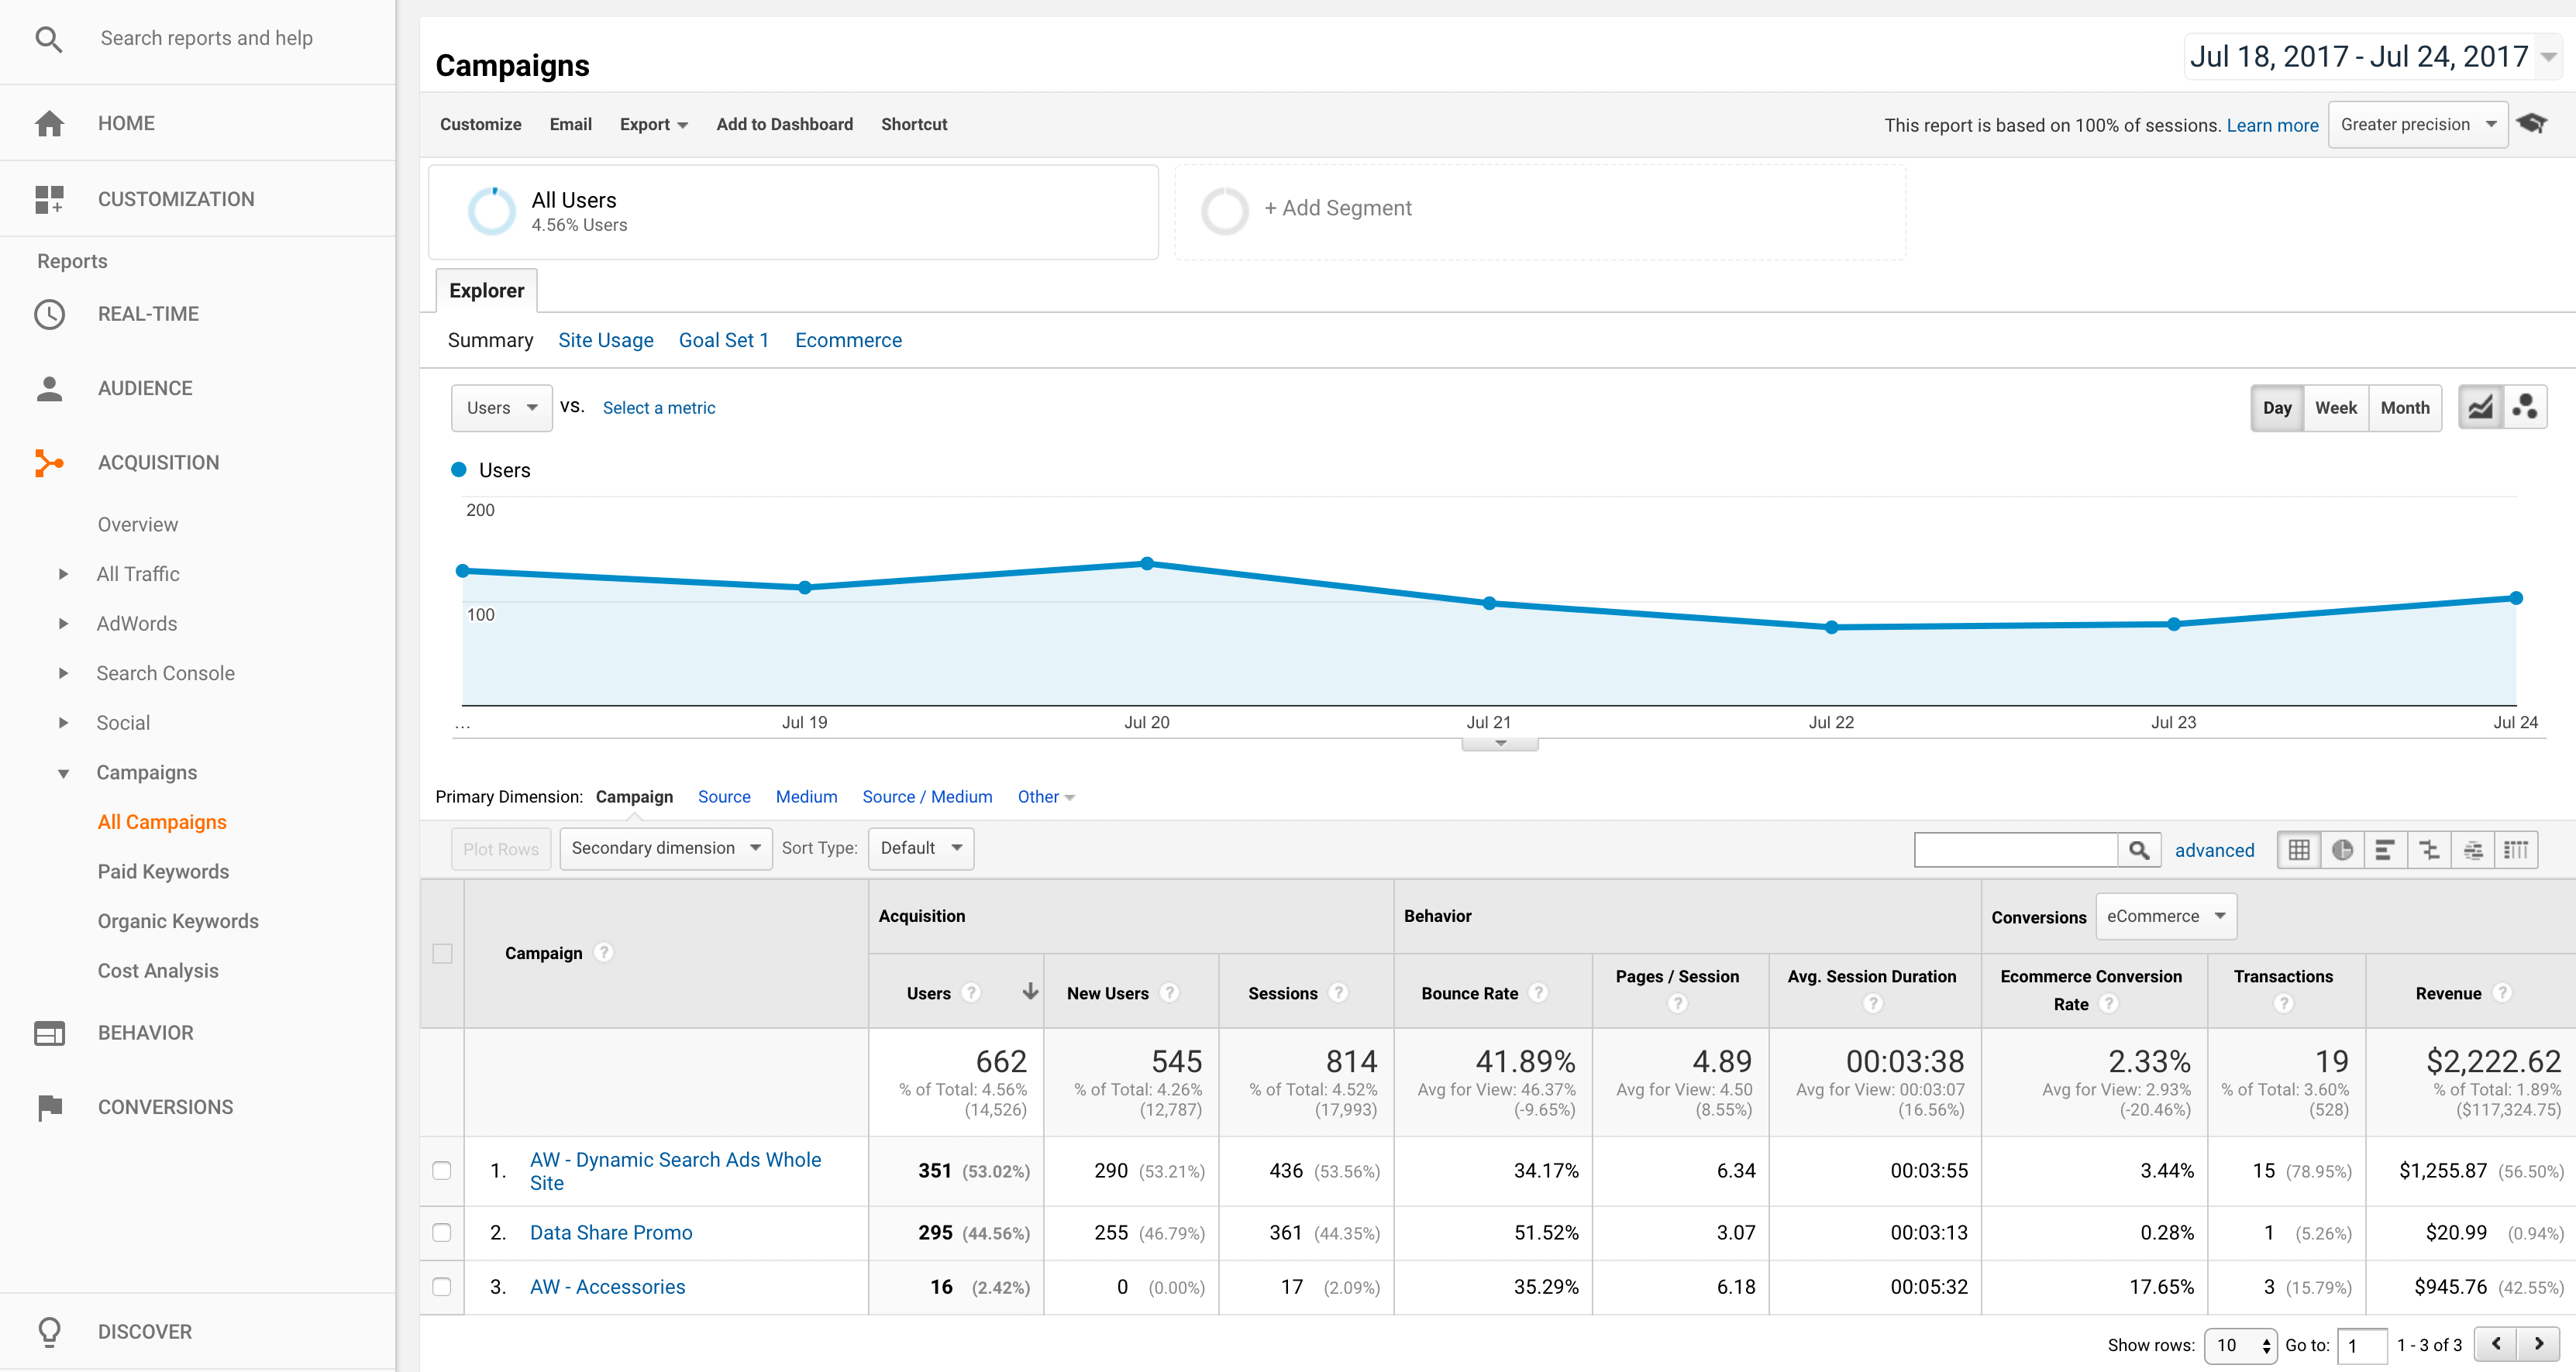 The Google Analytics campaign page